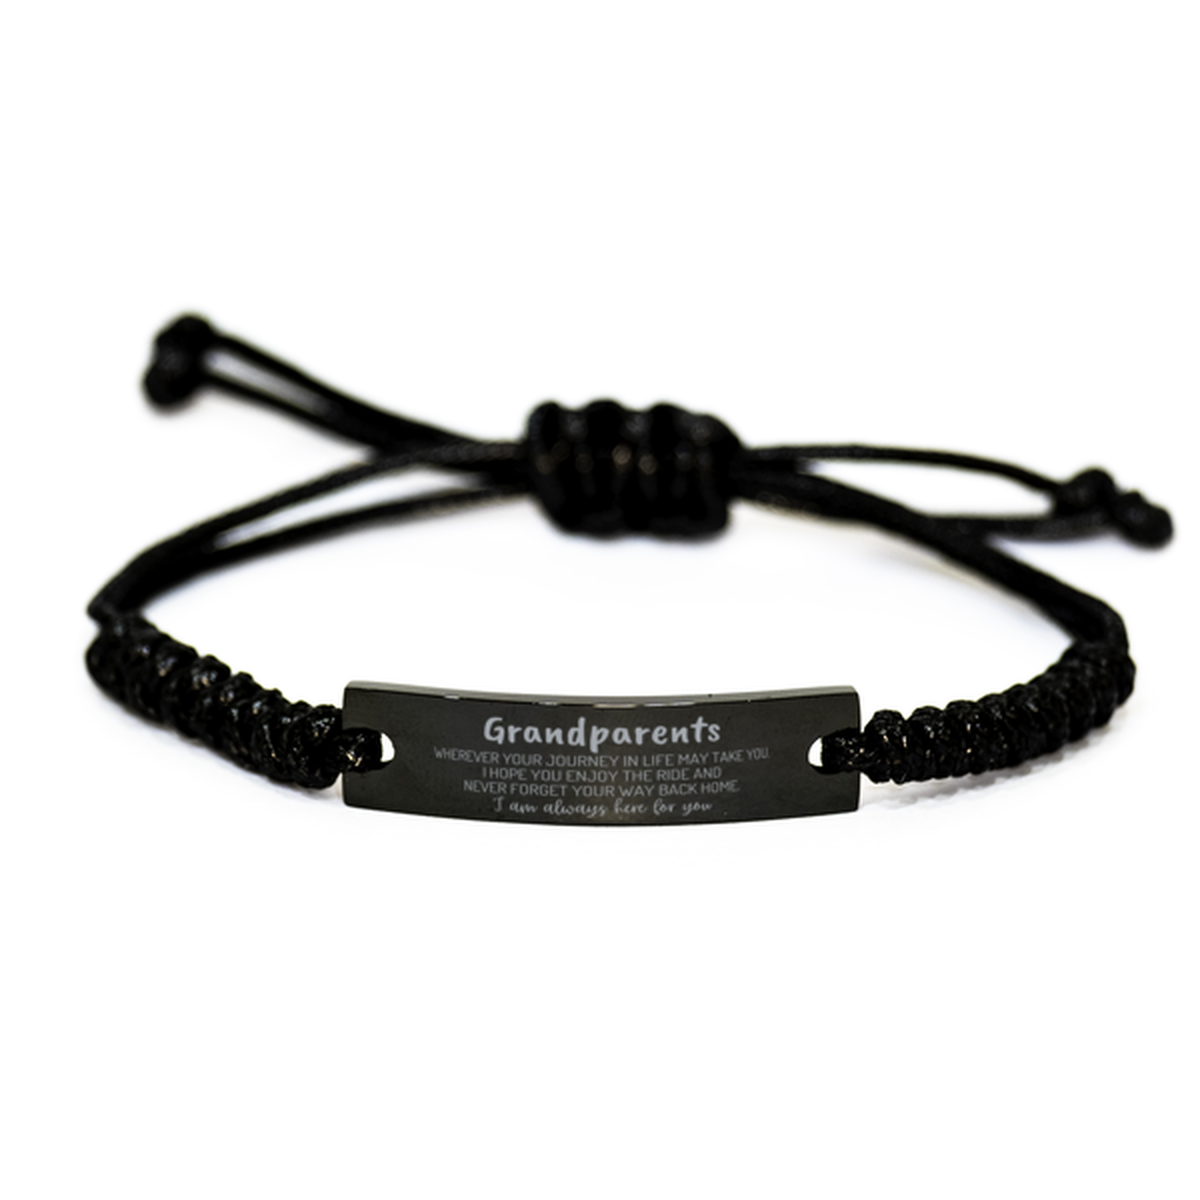 Grandparents wherever your journey in life may take you, I am always here for you Grandparents Black Rope Bracelet, Awesome Christmas Gifts For Grandparents, Grandparents Birthday Gifts for Men Women Family Loved One